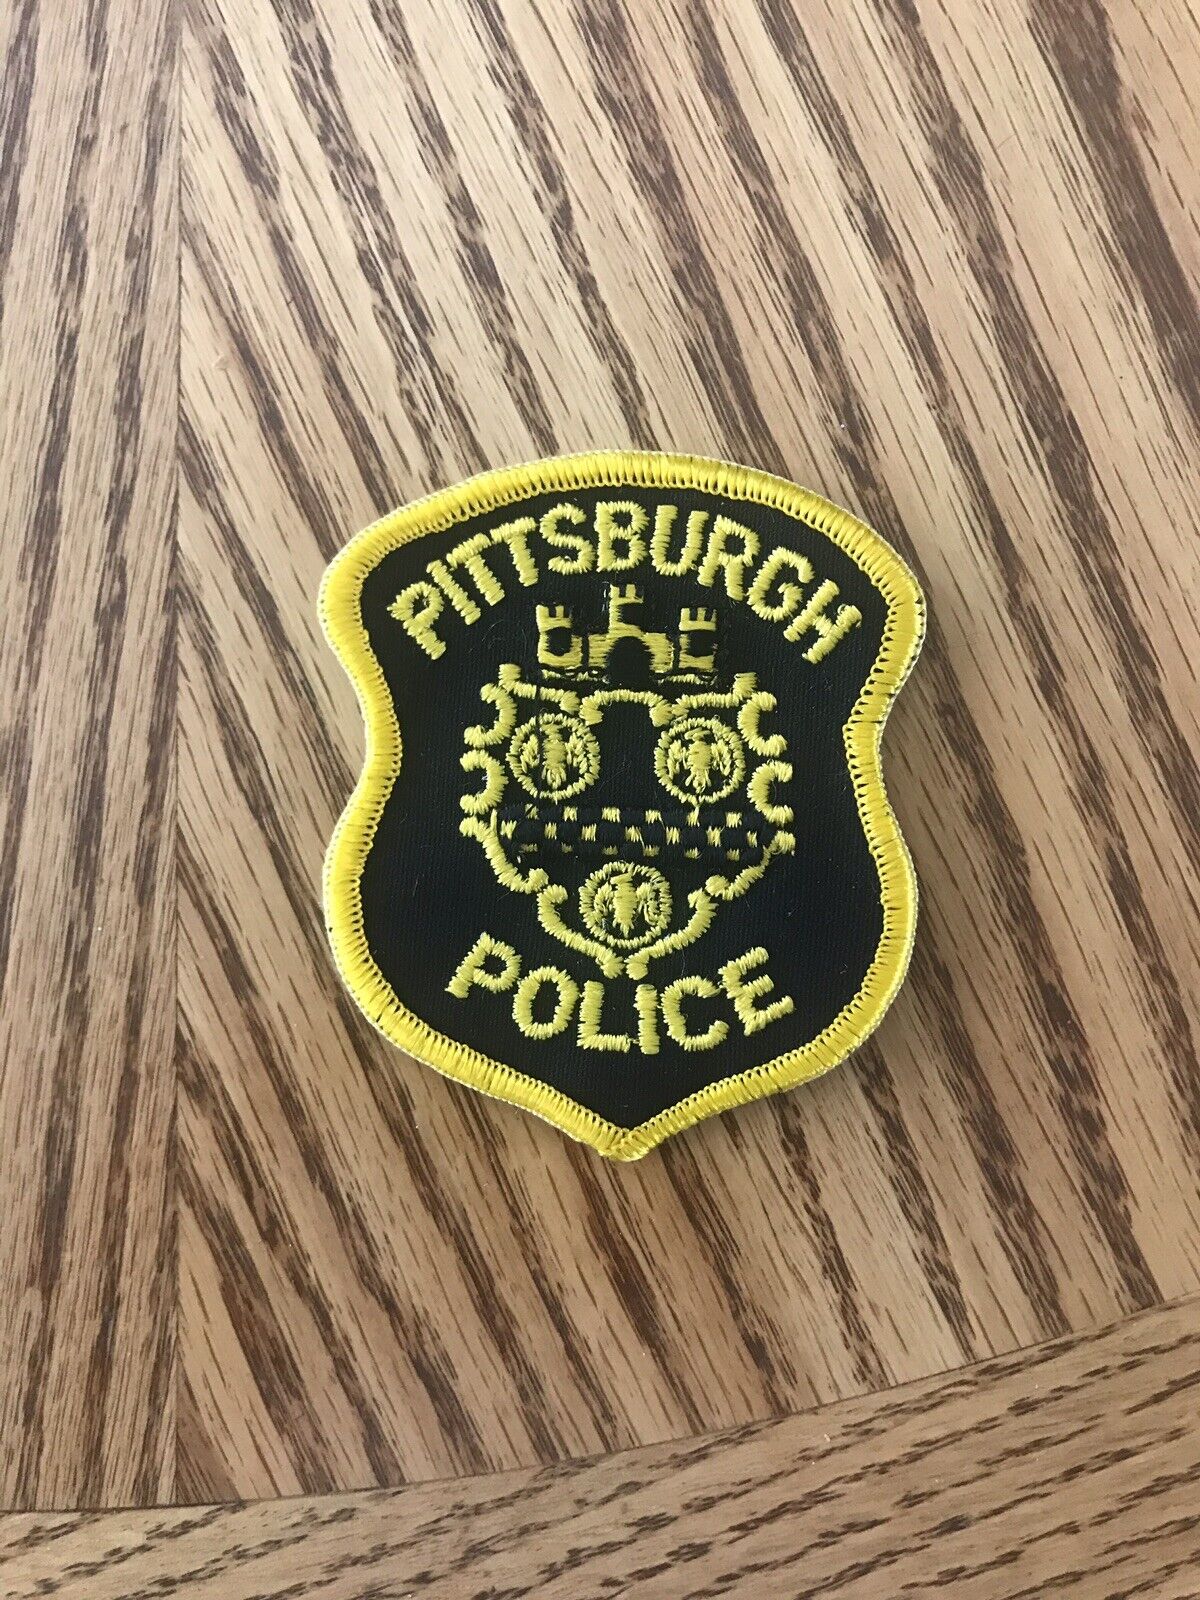 Vintage Pittsburgh Police Patch